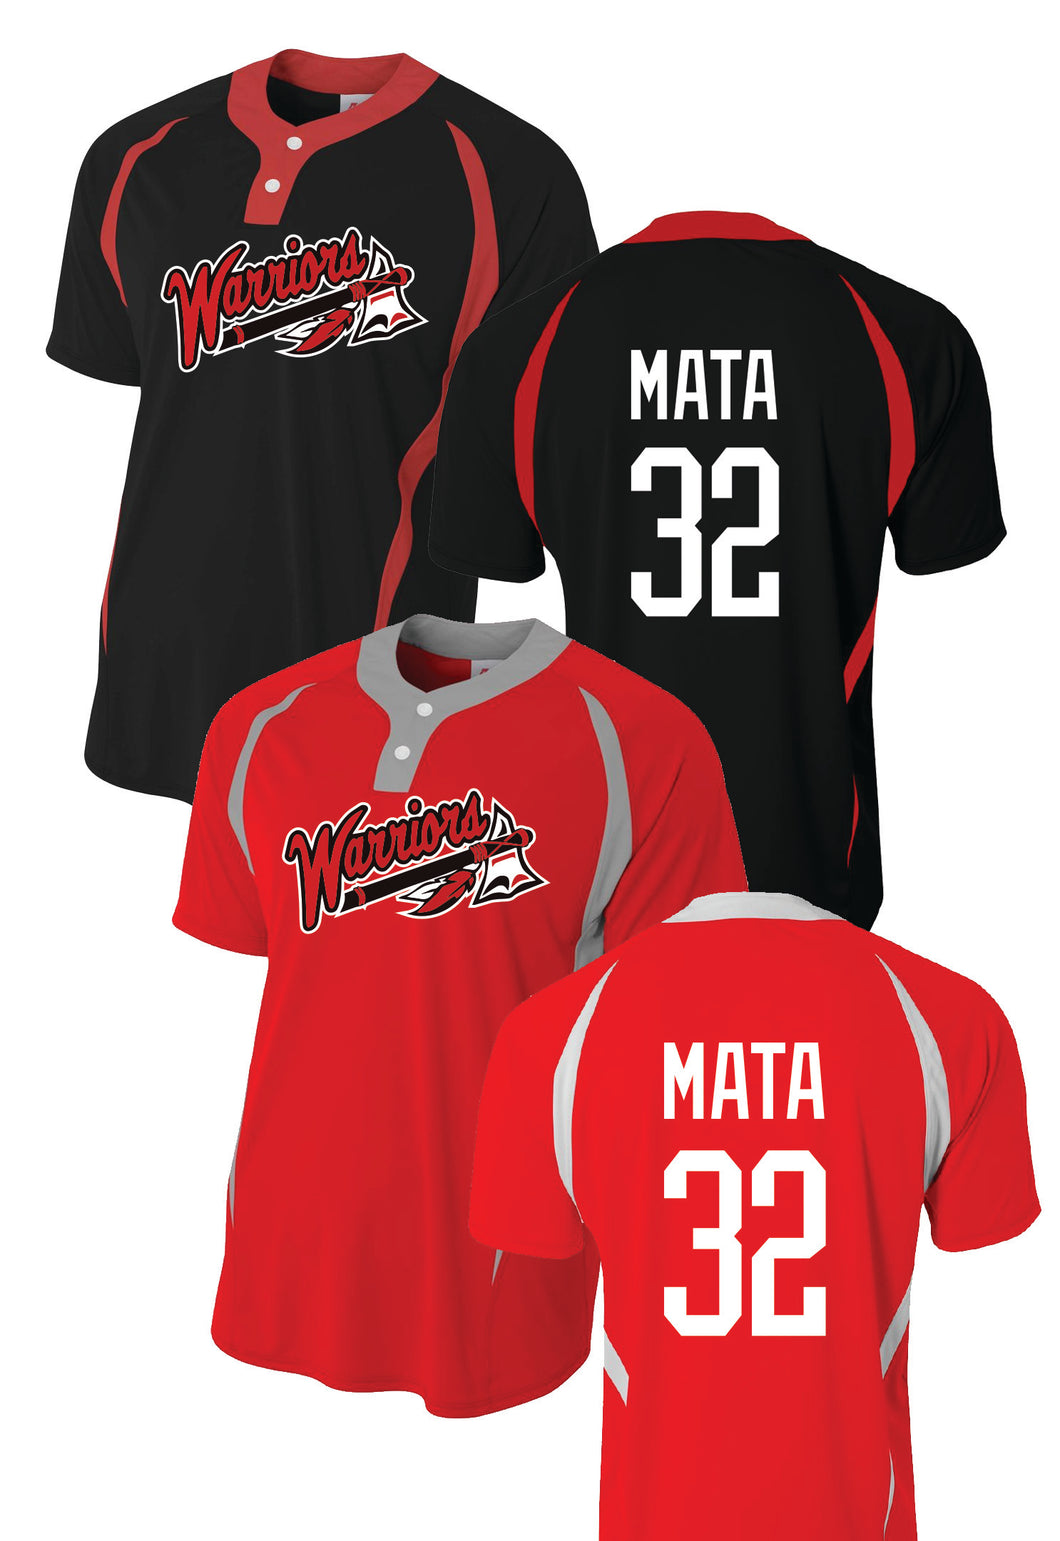 WARRIOR JERSEY - 2 COMBO PACK - 1 RED + 1 BLACK JERSEY